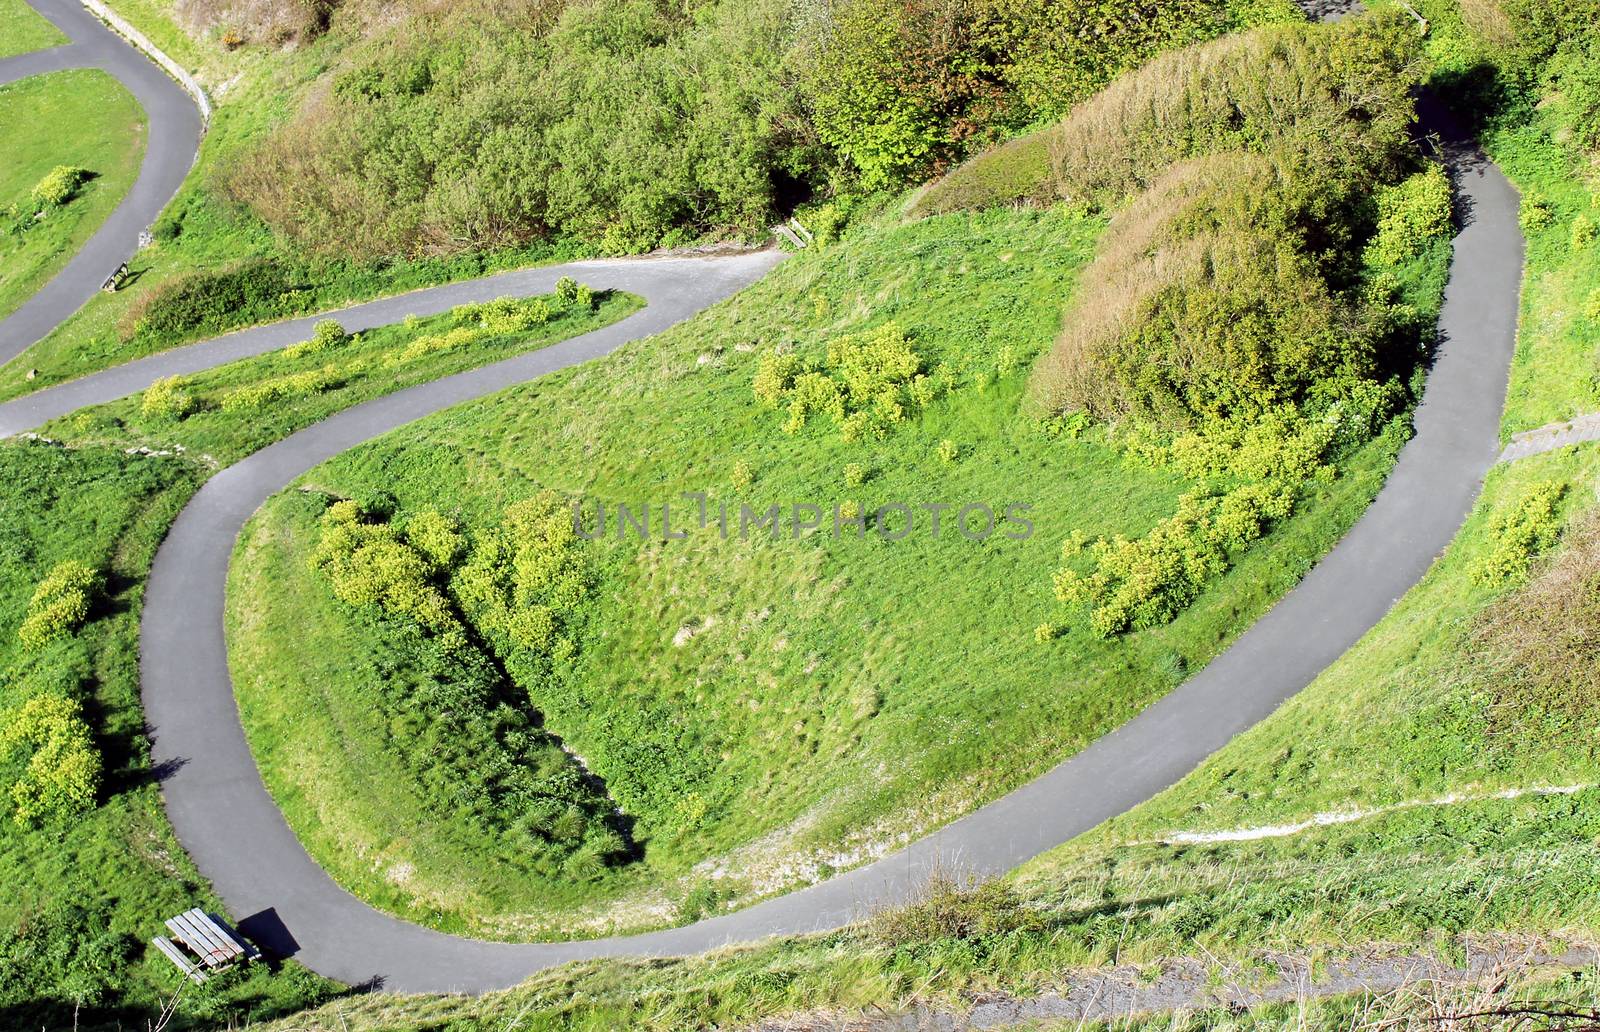 Overhead view of a winding path on a hillside.